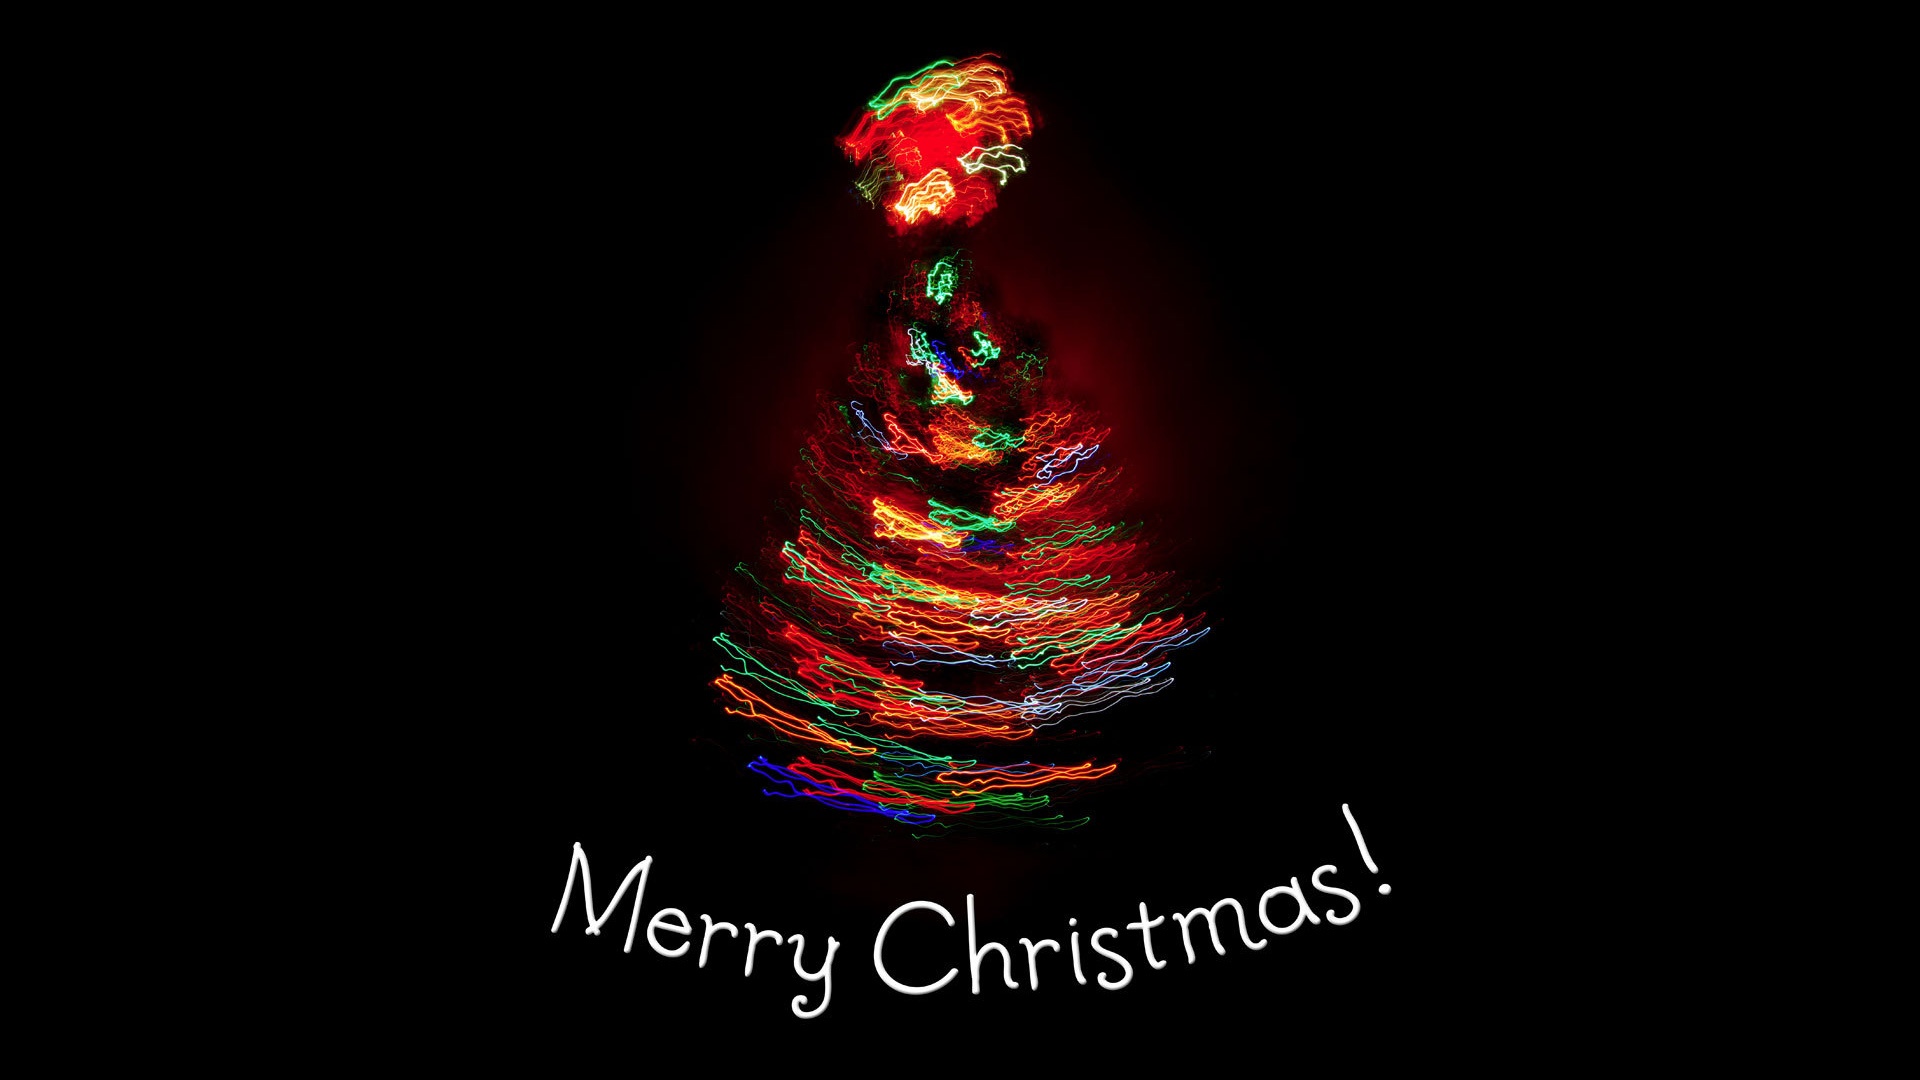 Merry Christmas Wallpaper Pictures Image